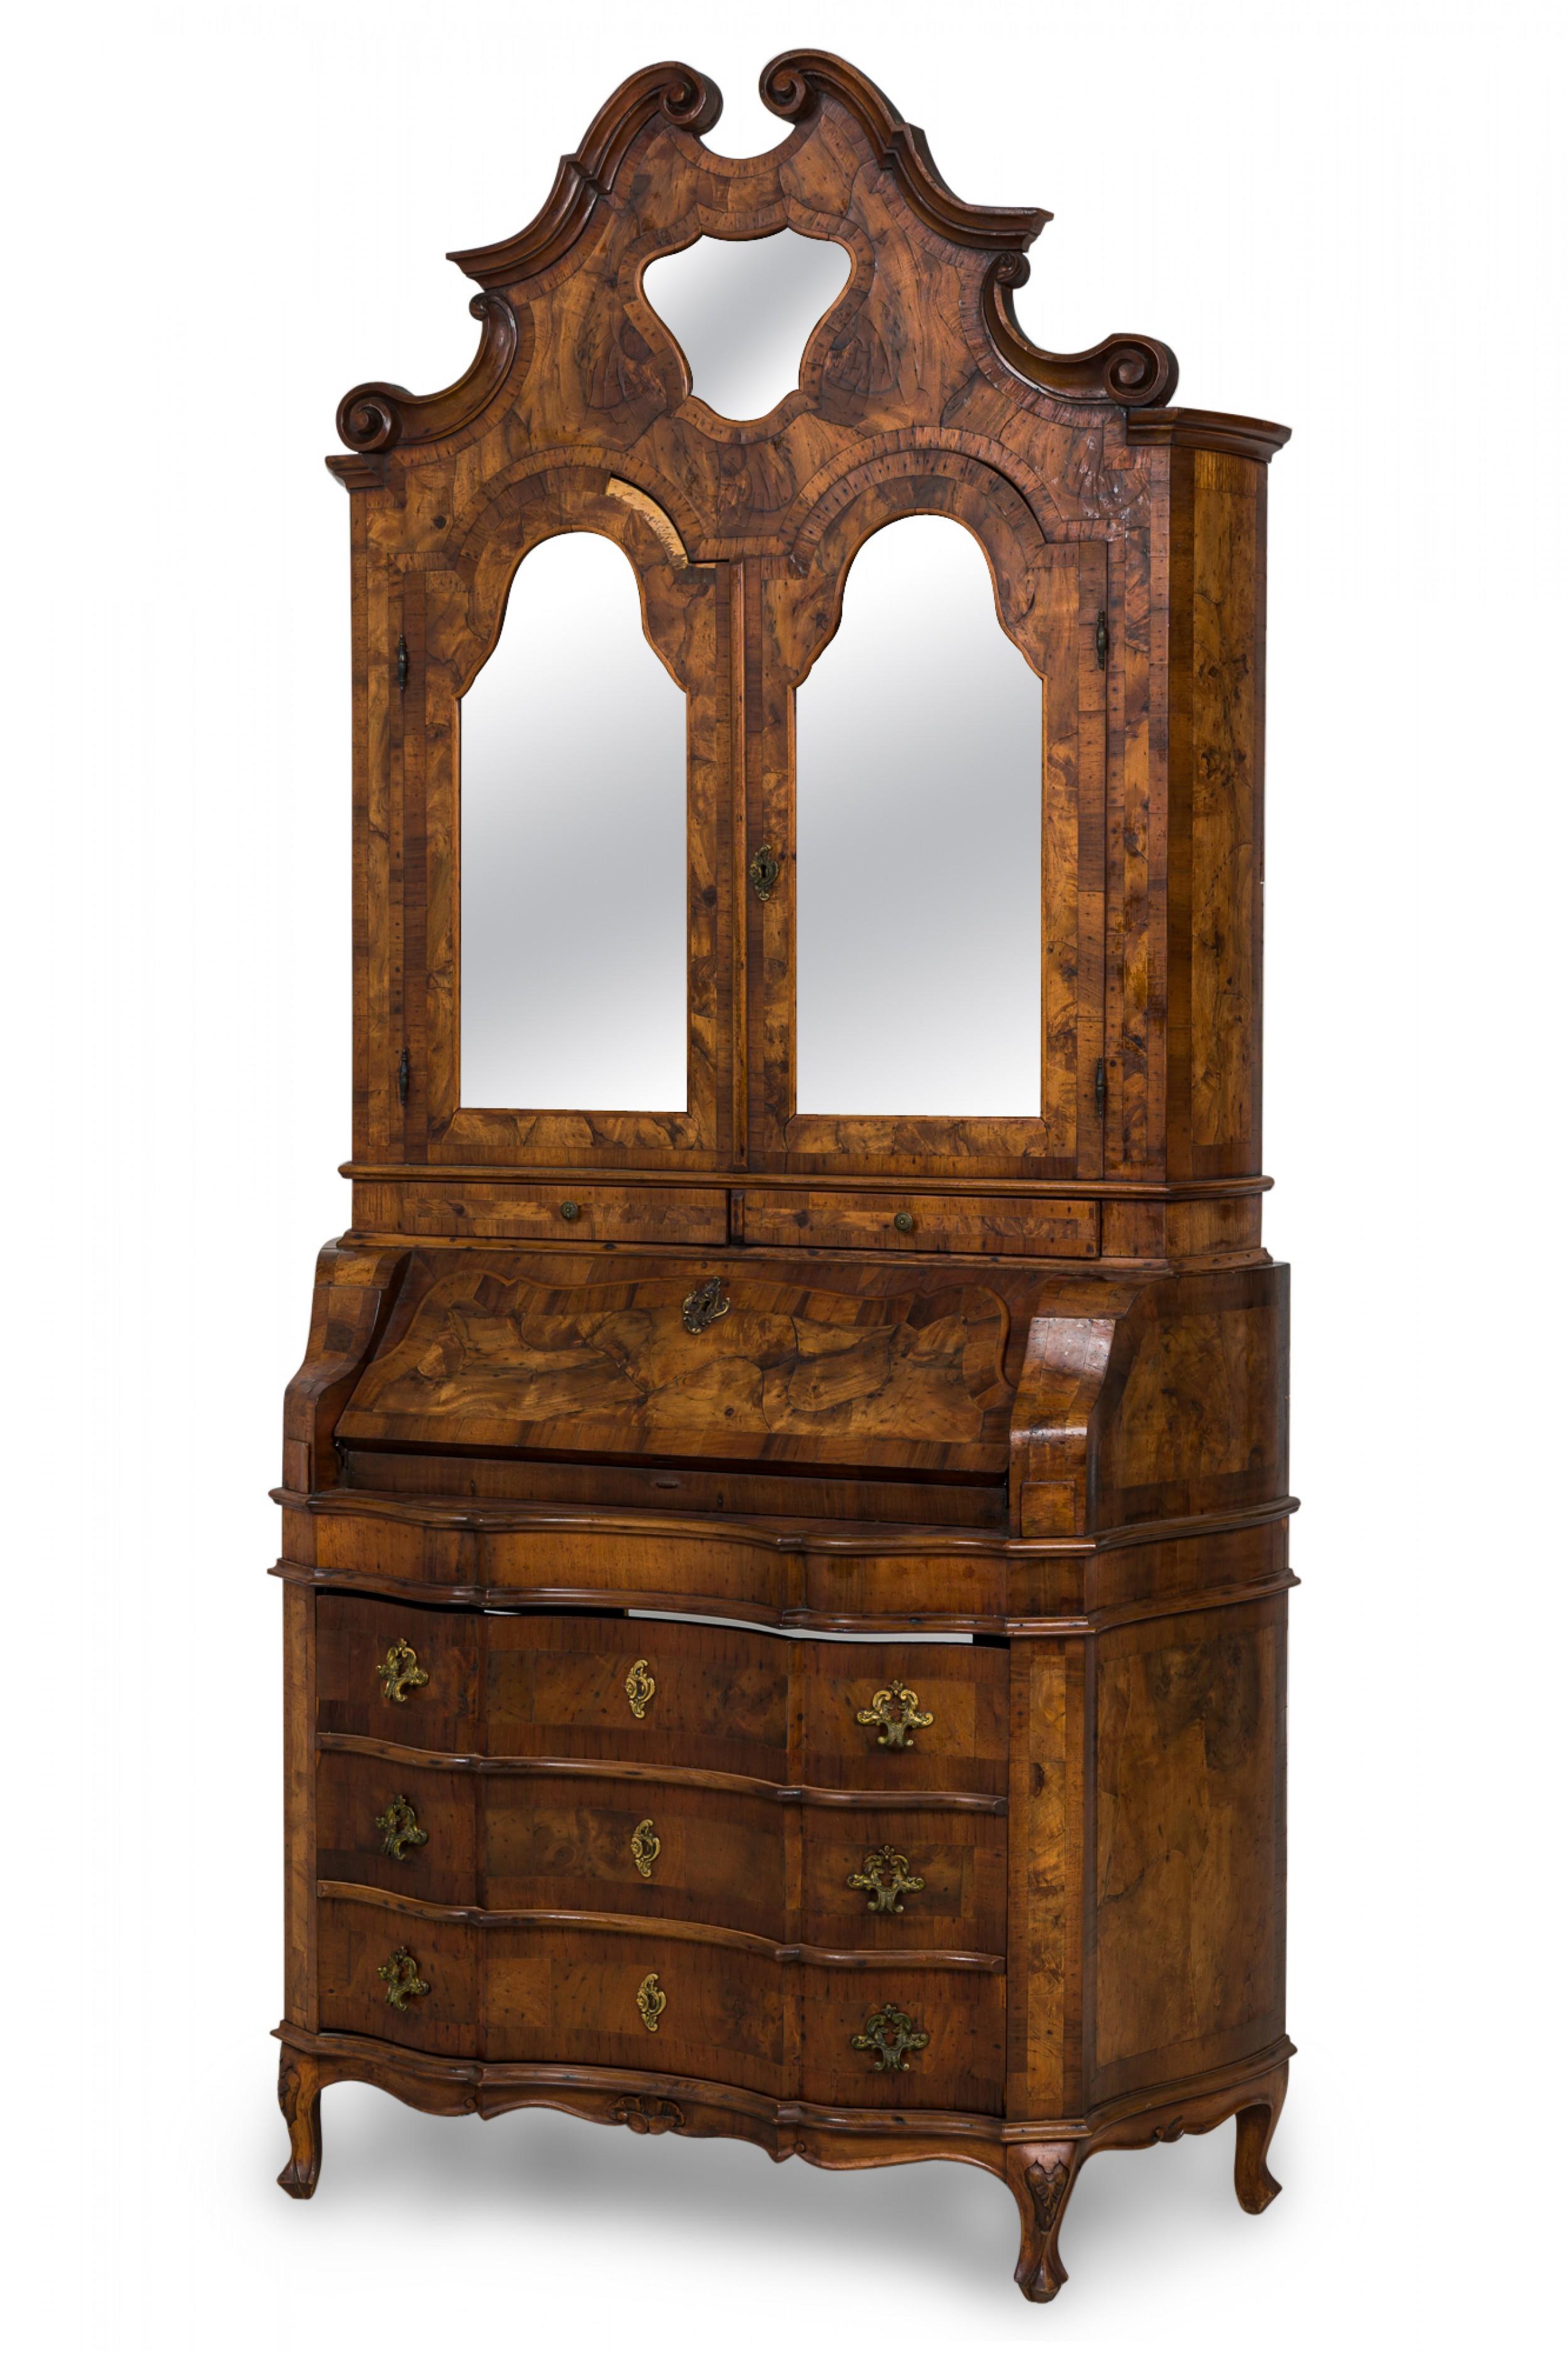 Italian Rococo secretary desk / cabinet with an upper door that folds down to reveal a writing surface and 5 small interior drawers, over three drawers with serpentine fronts and ornate brass drawer pulls, finished in an oyster burl veneer and